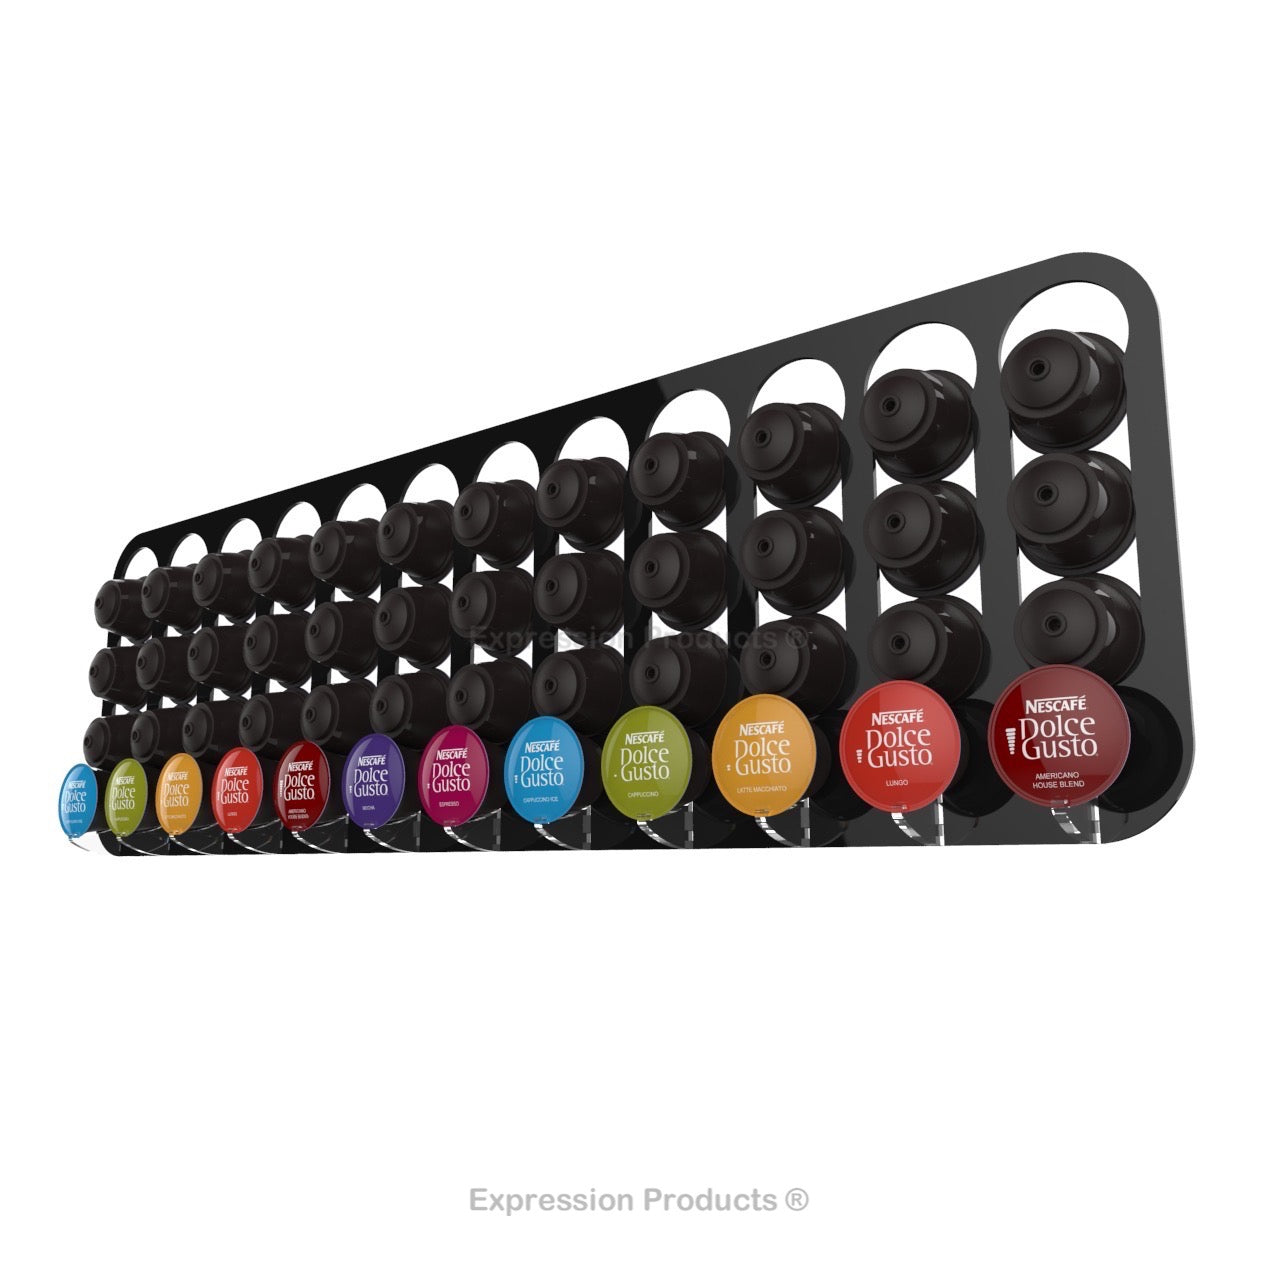 Dolce gusto coffee pod holder, wall mounted, half height.  Shown in black holding 48 pods